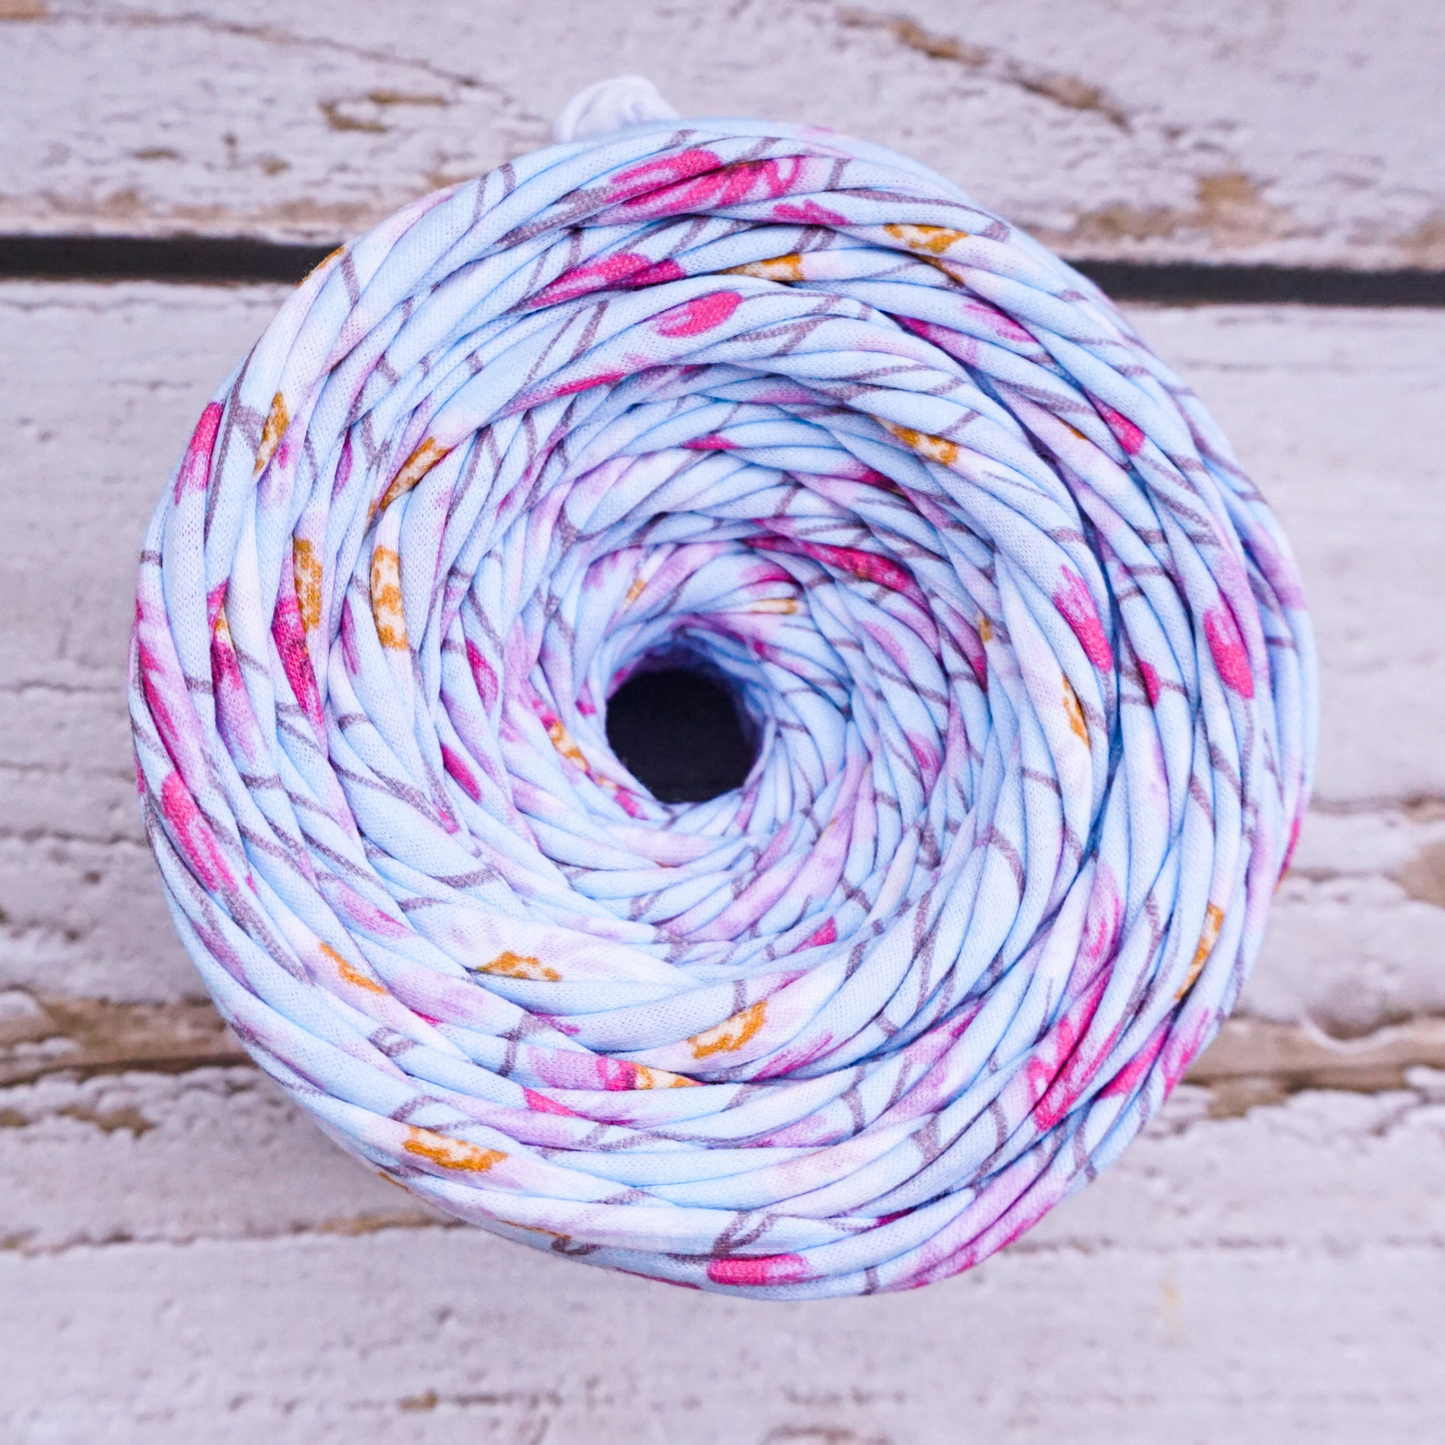 T-shirt yarn for crocheting baskets, bags, rugs and home decor. Flower print